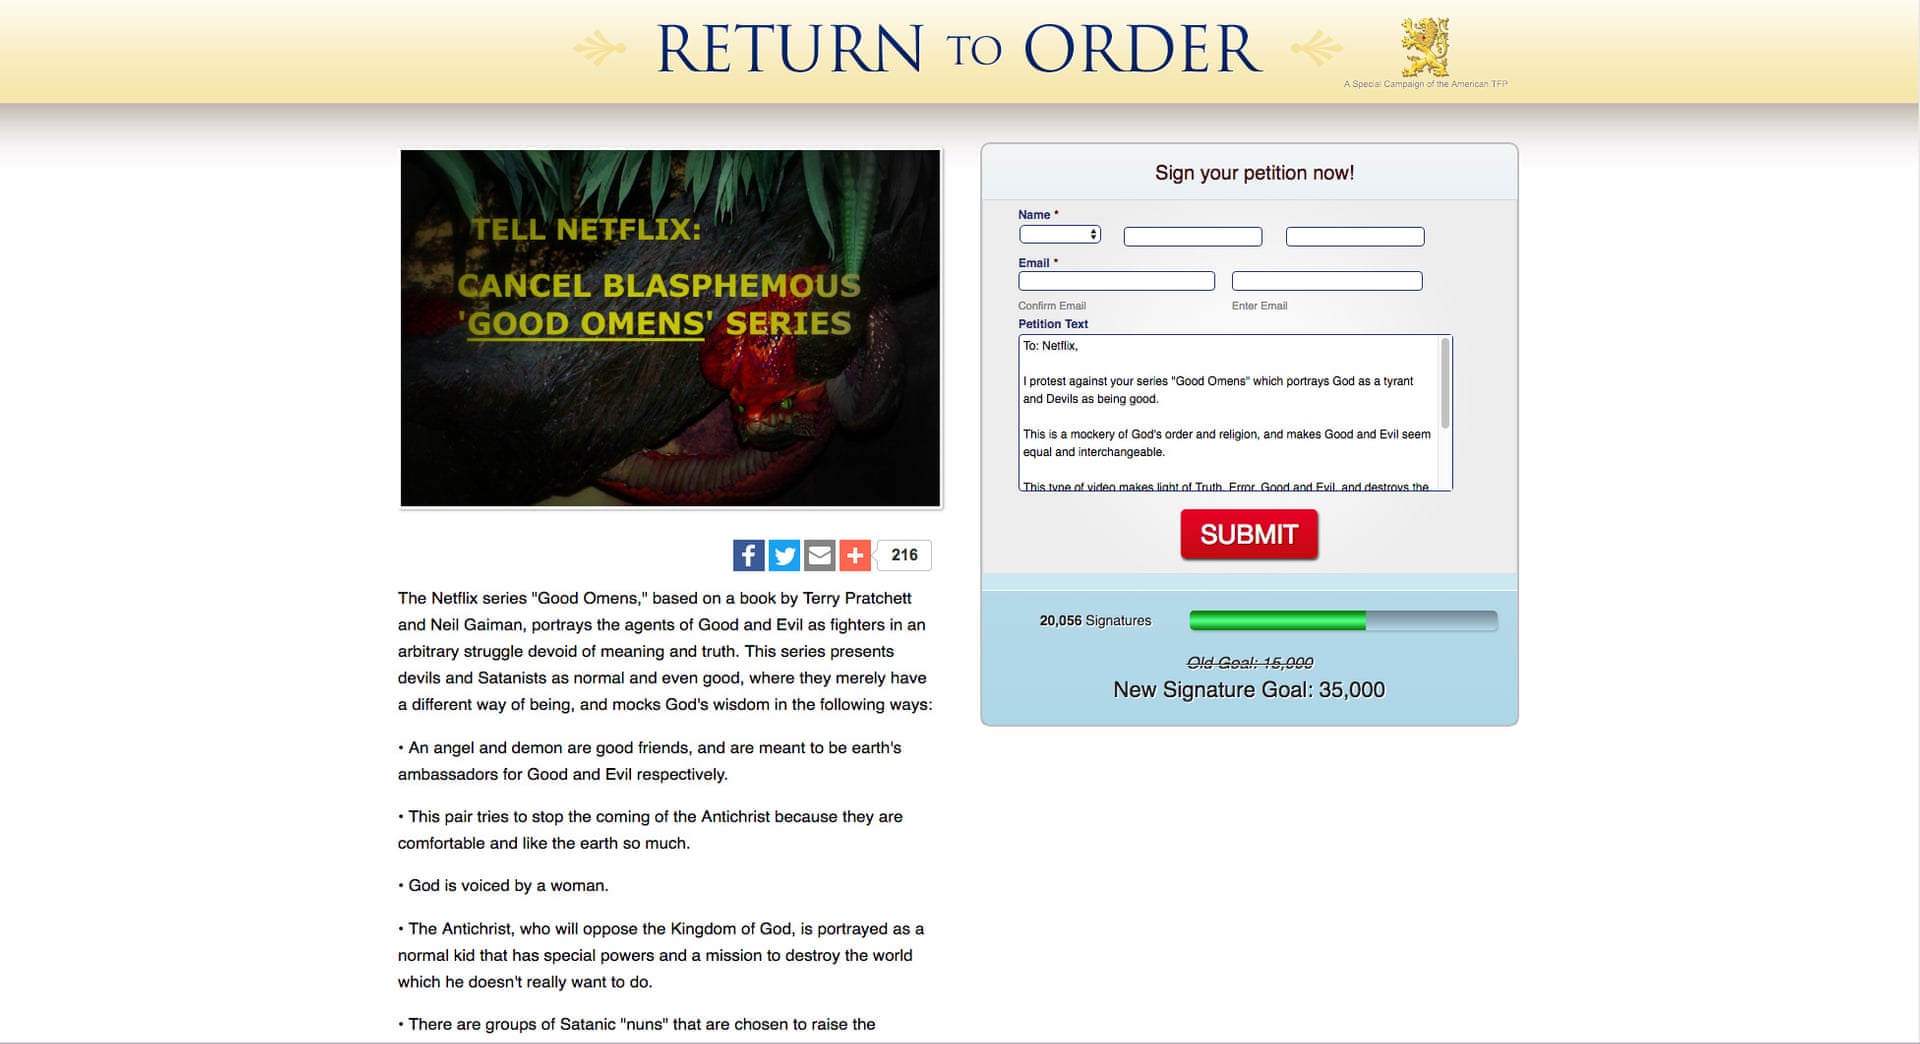 image of a petition to cancel Good Omens from return to order